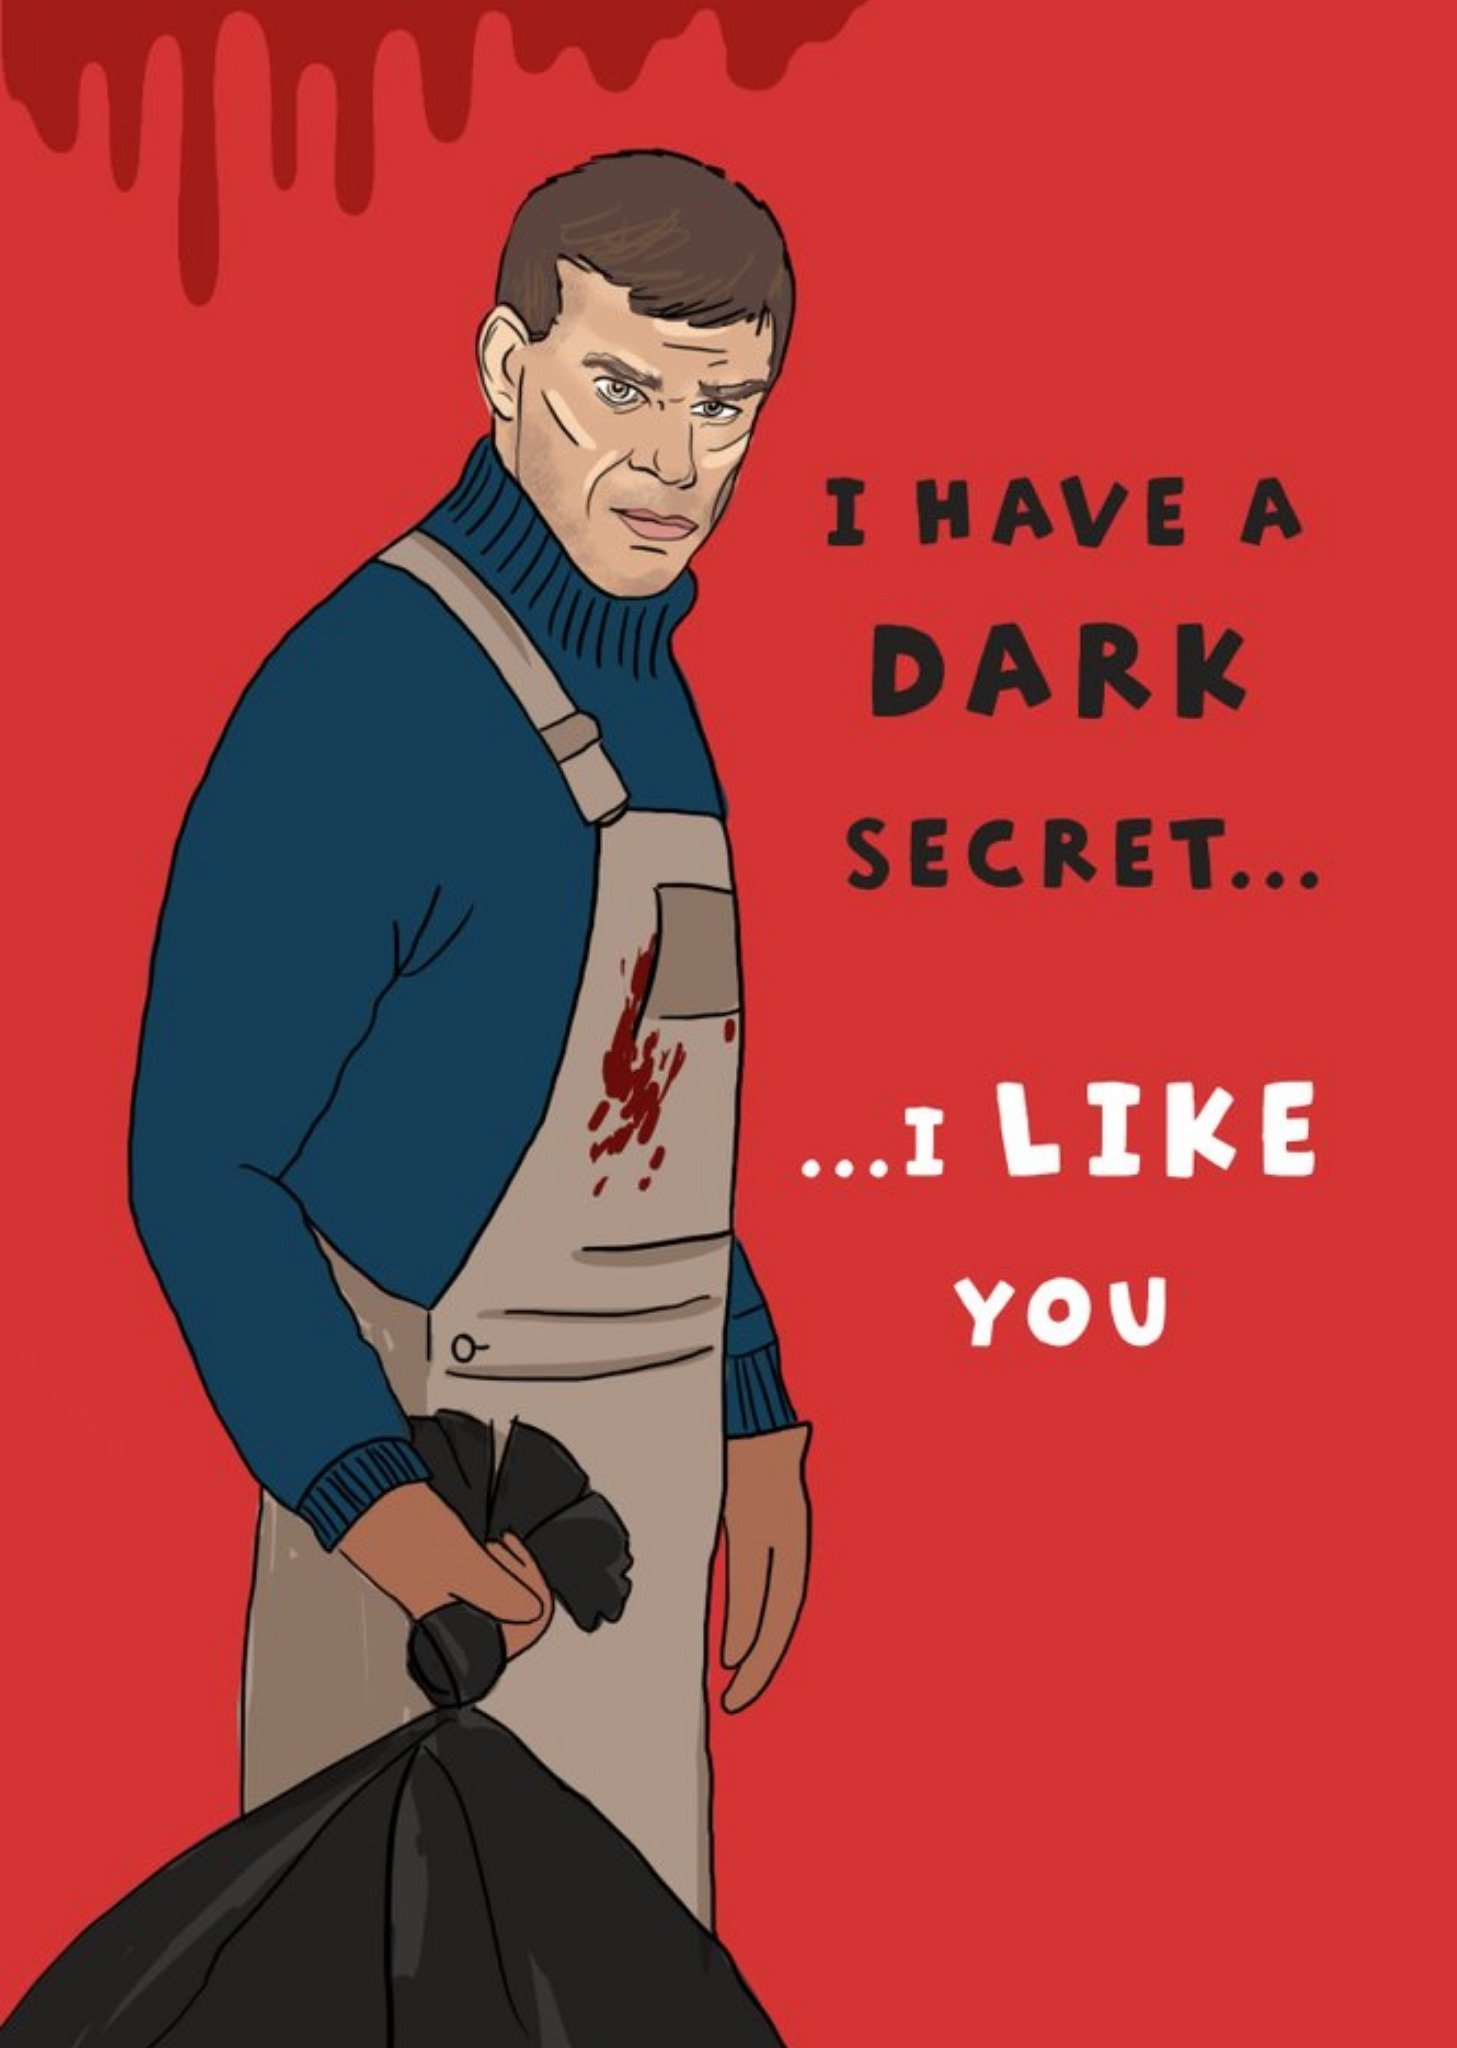 Moonpig Ukg Topical Funny Dexter New Blood Valentine's Day Card Ecard